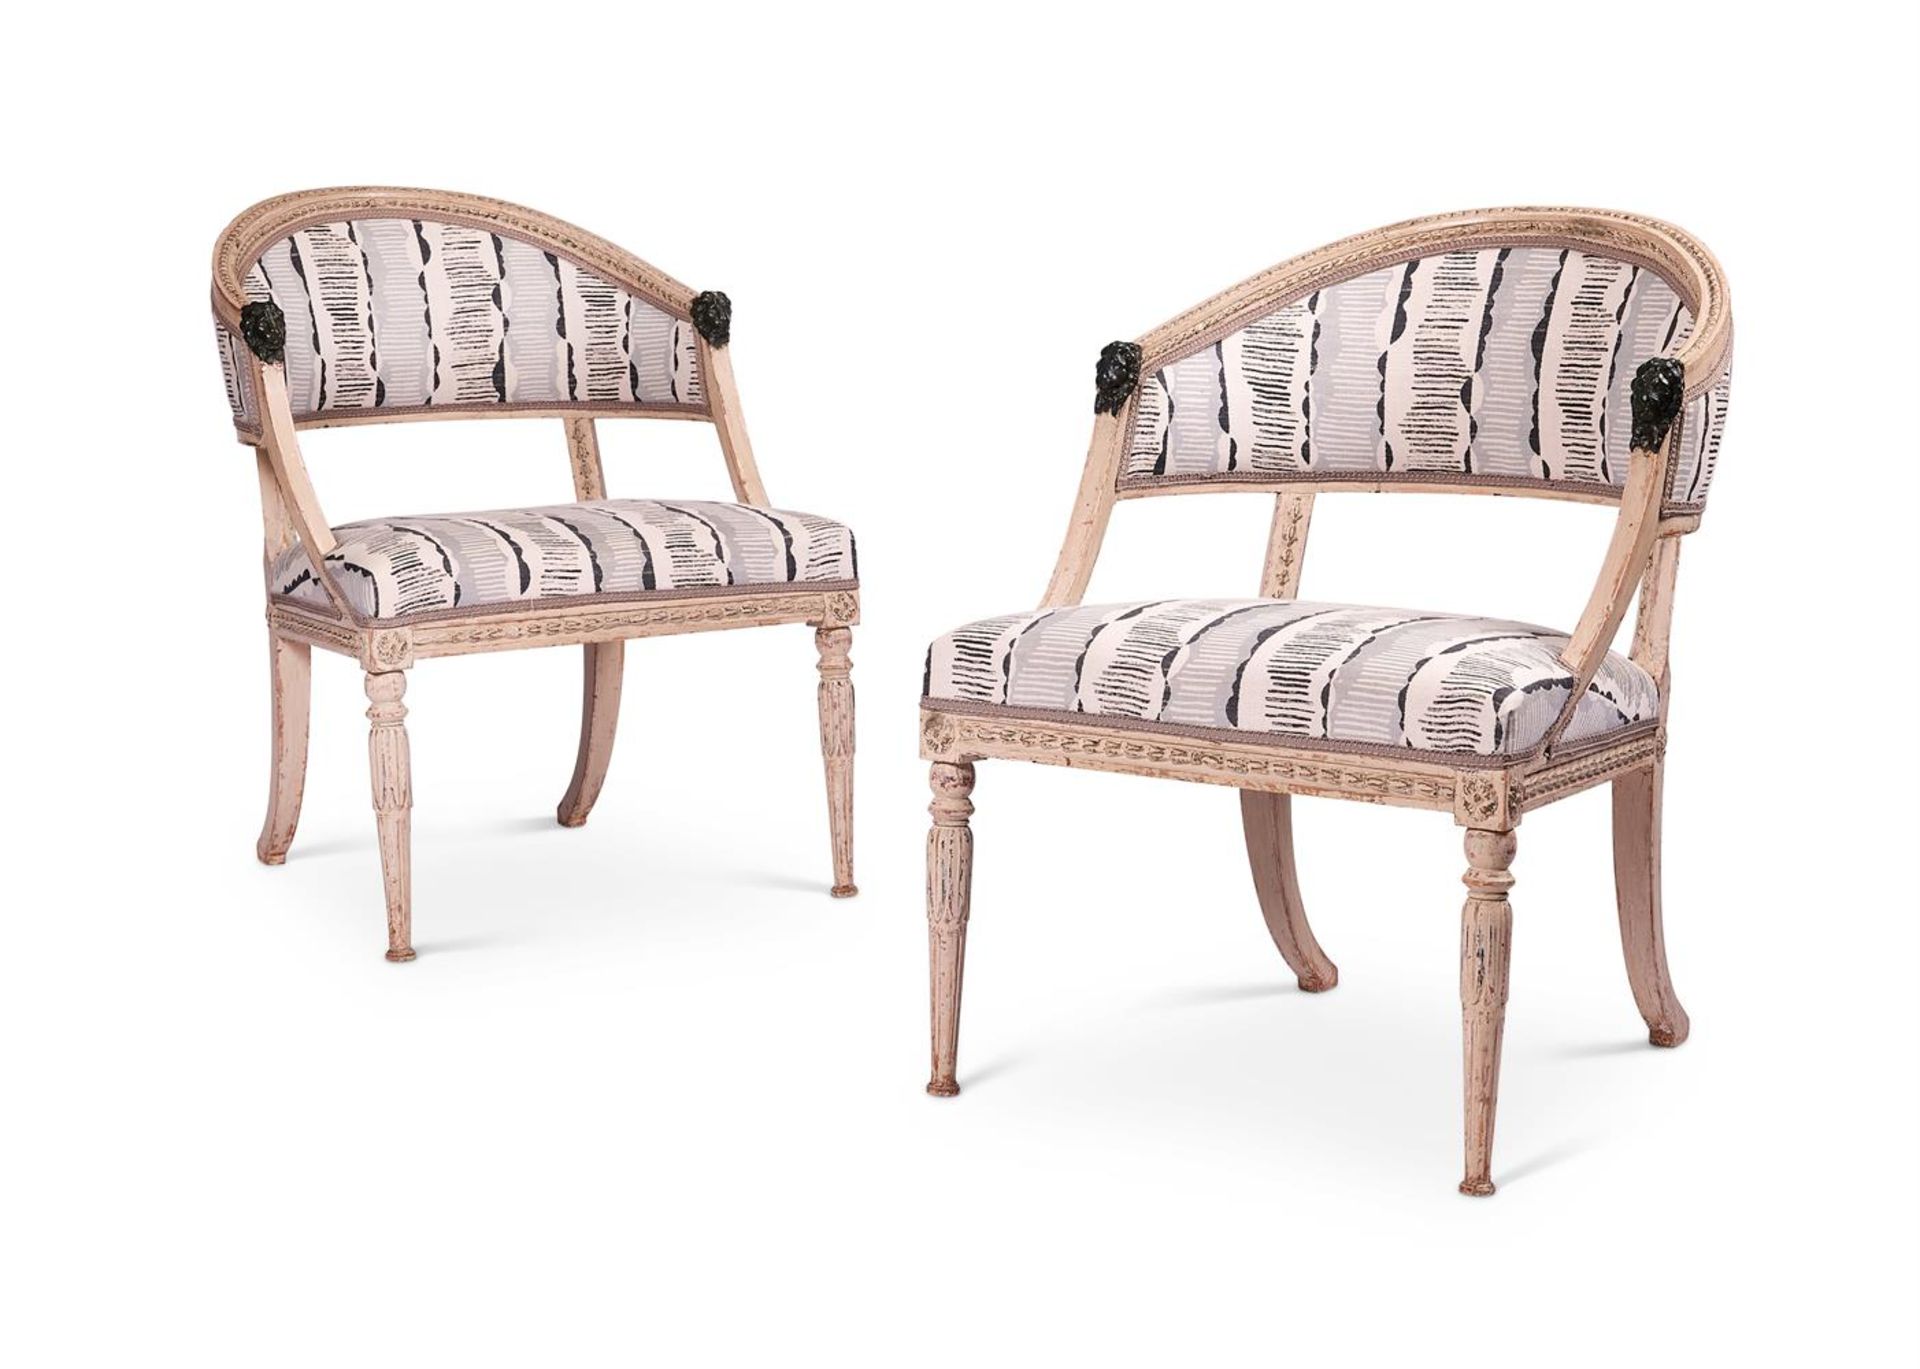 A PAIR OF GUSTAVIAN CREAM PAINTED AND UPHOLSTERED ARMCHAIRS SWEDISH, CIRCA 1800